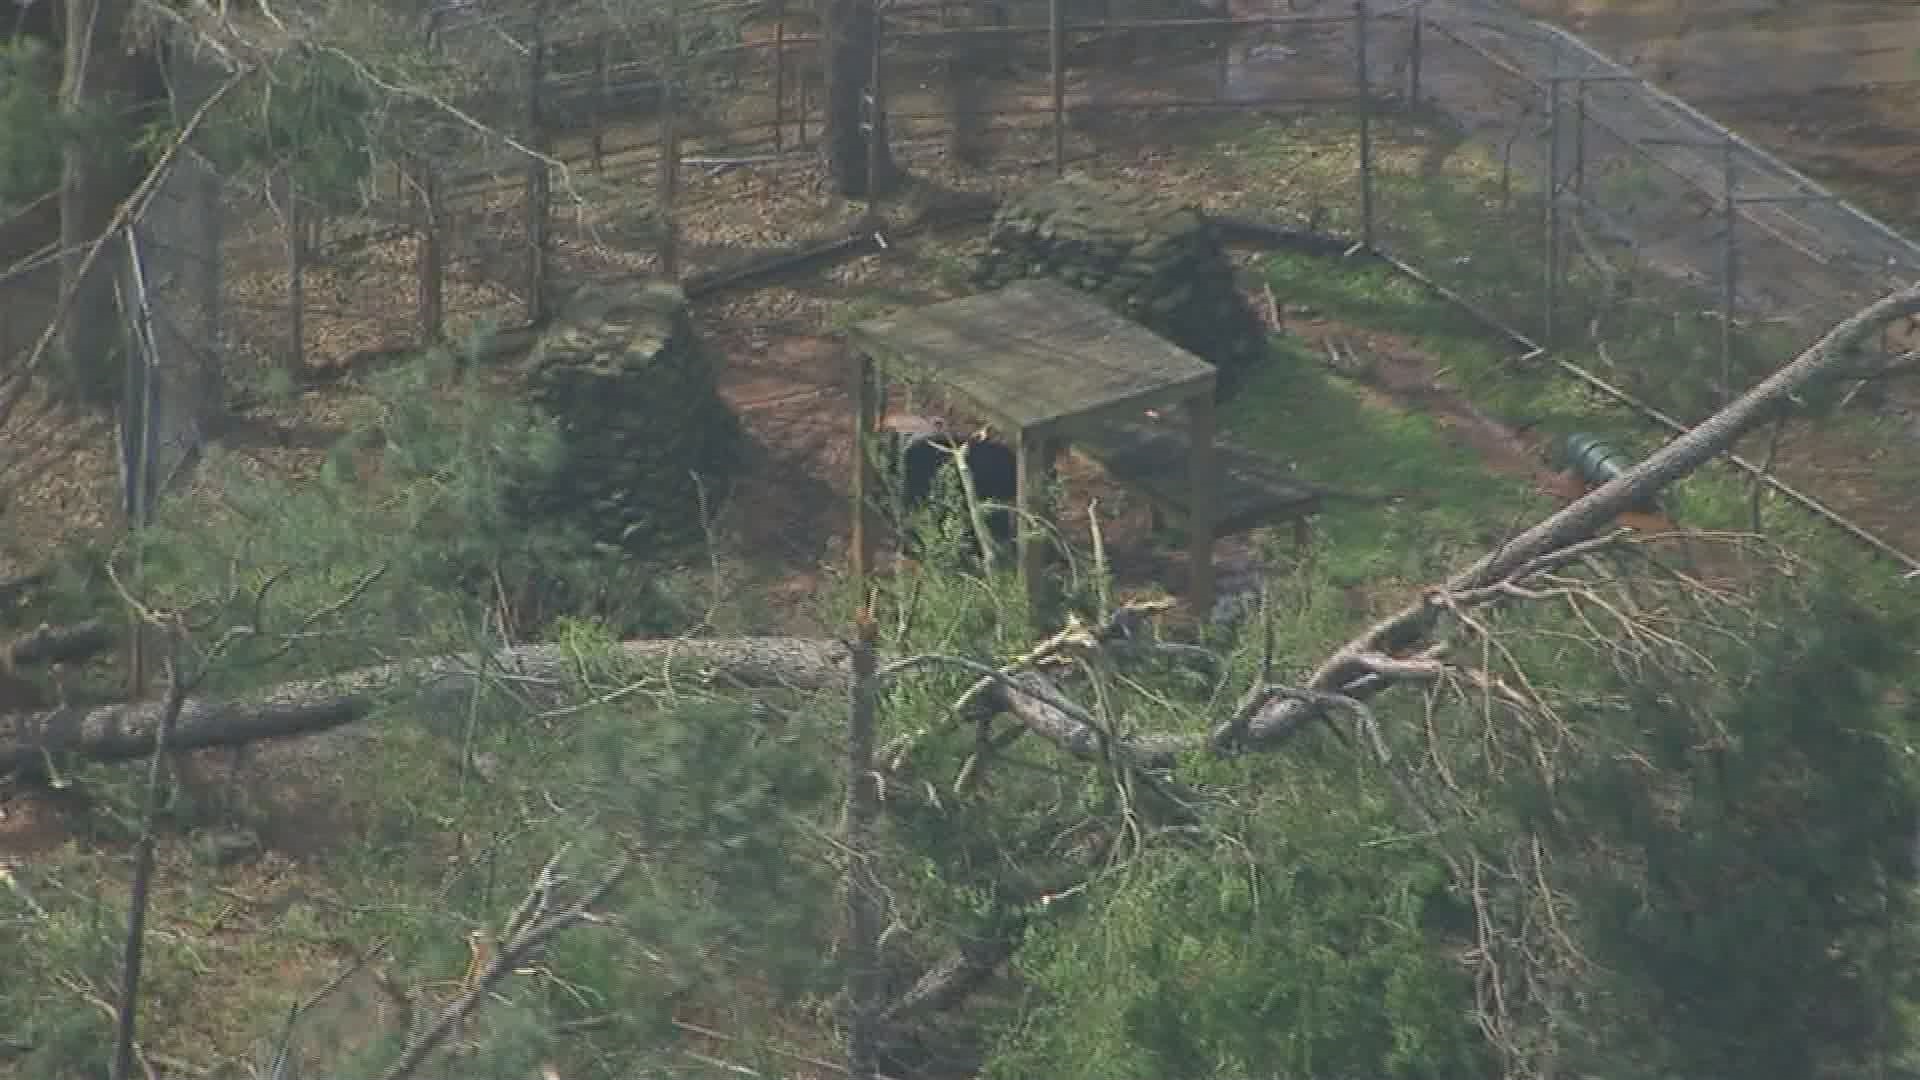 The tornado produced strong winds and uprooted many trees in the large safari space.